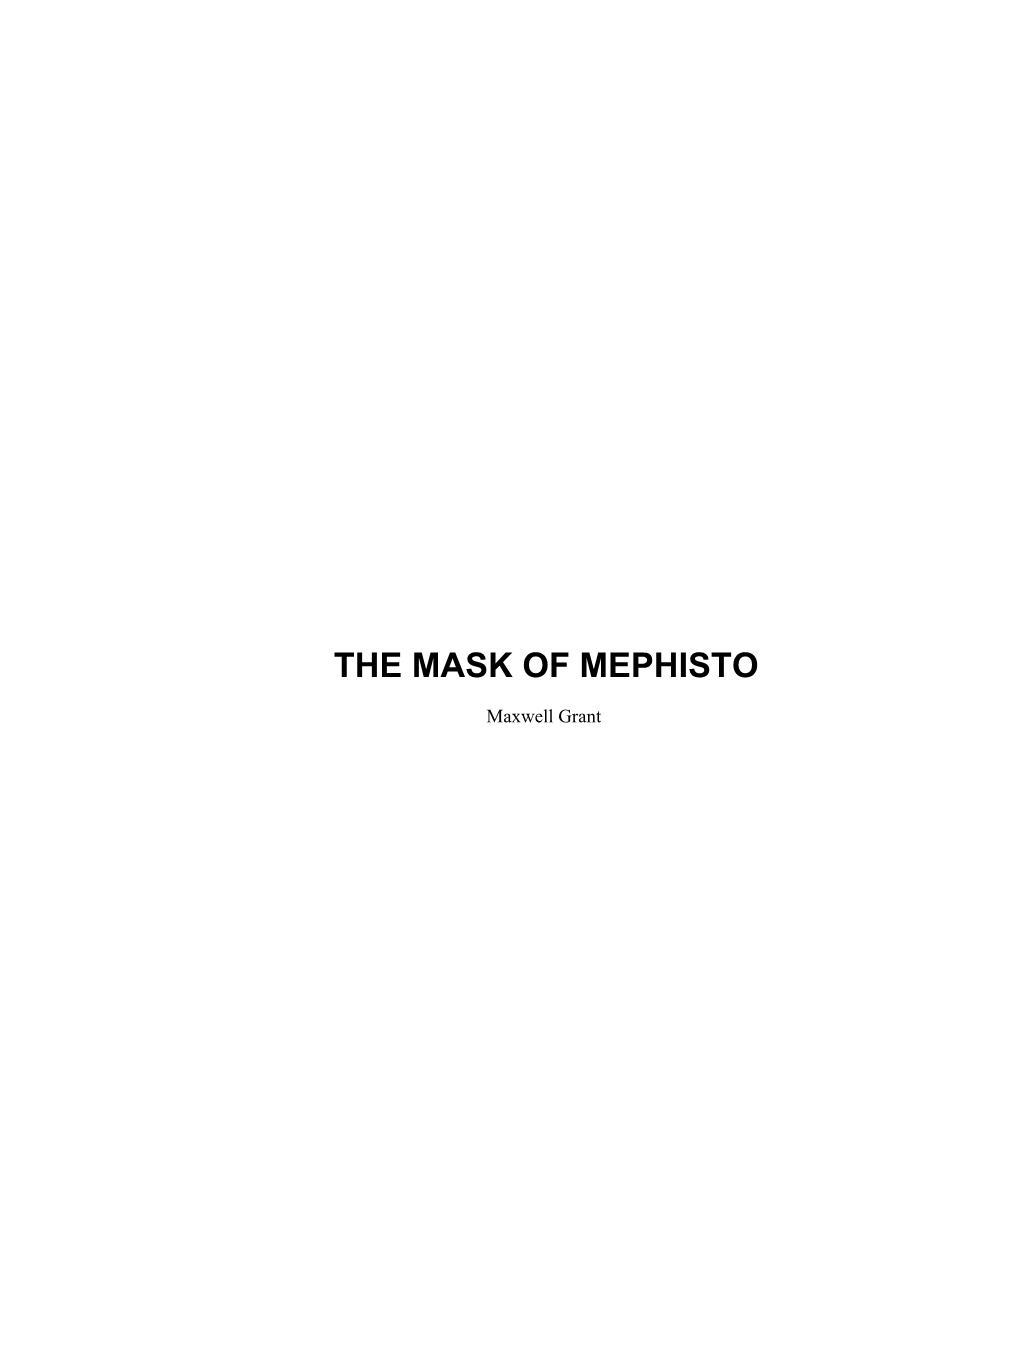 The Mask of Mephisto